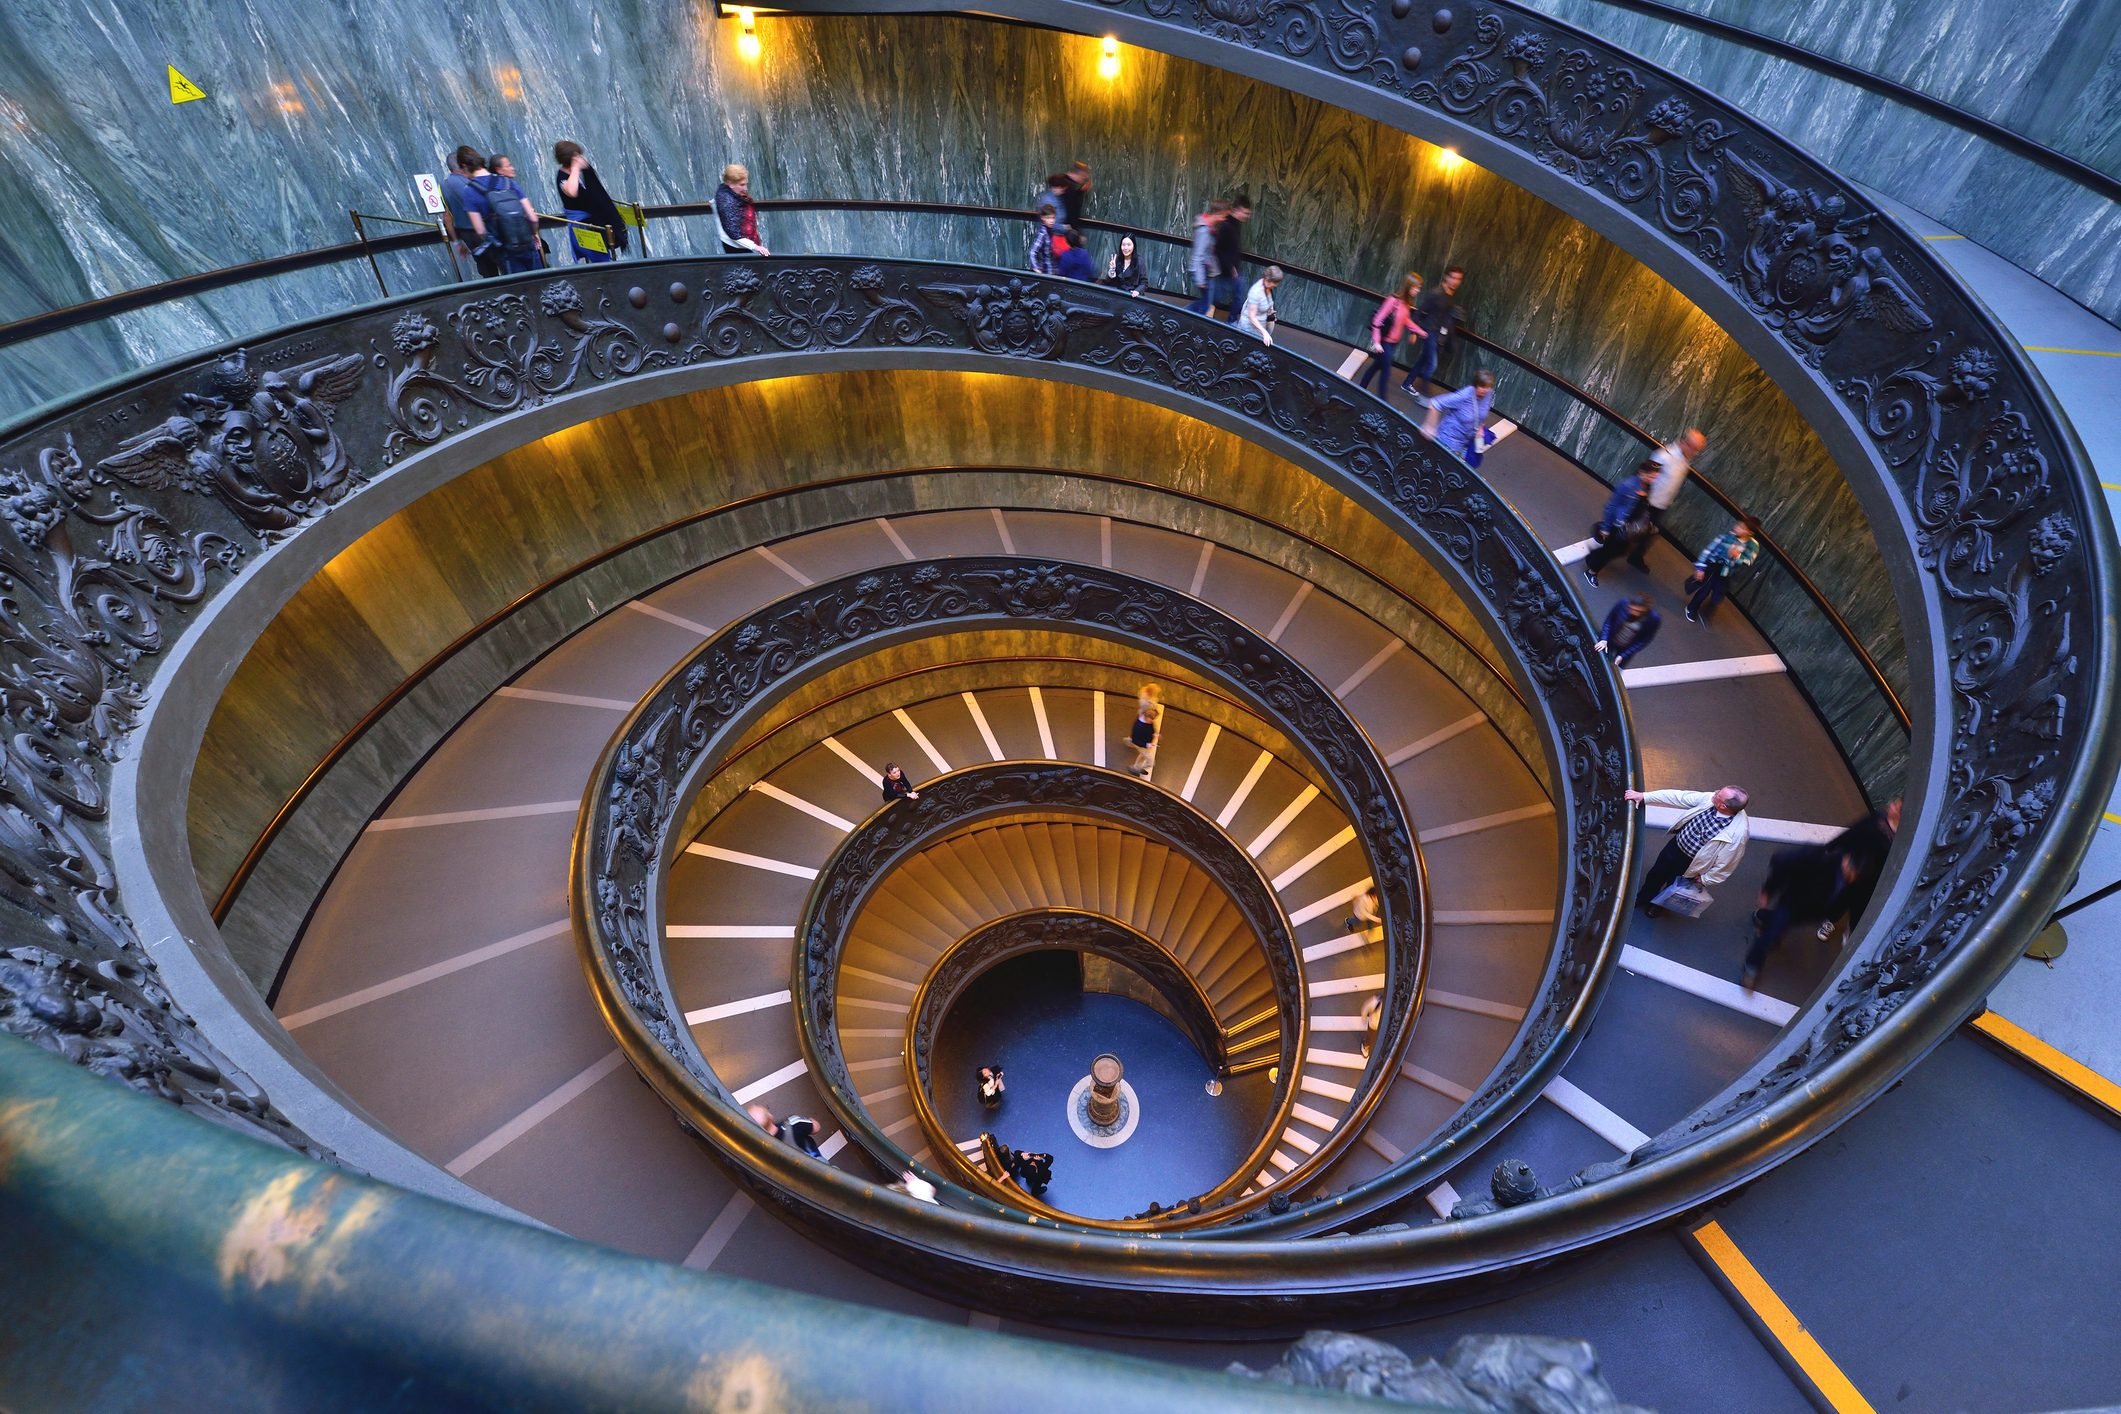 Spiral Staircase, Vatican Museum